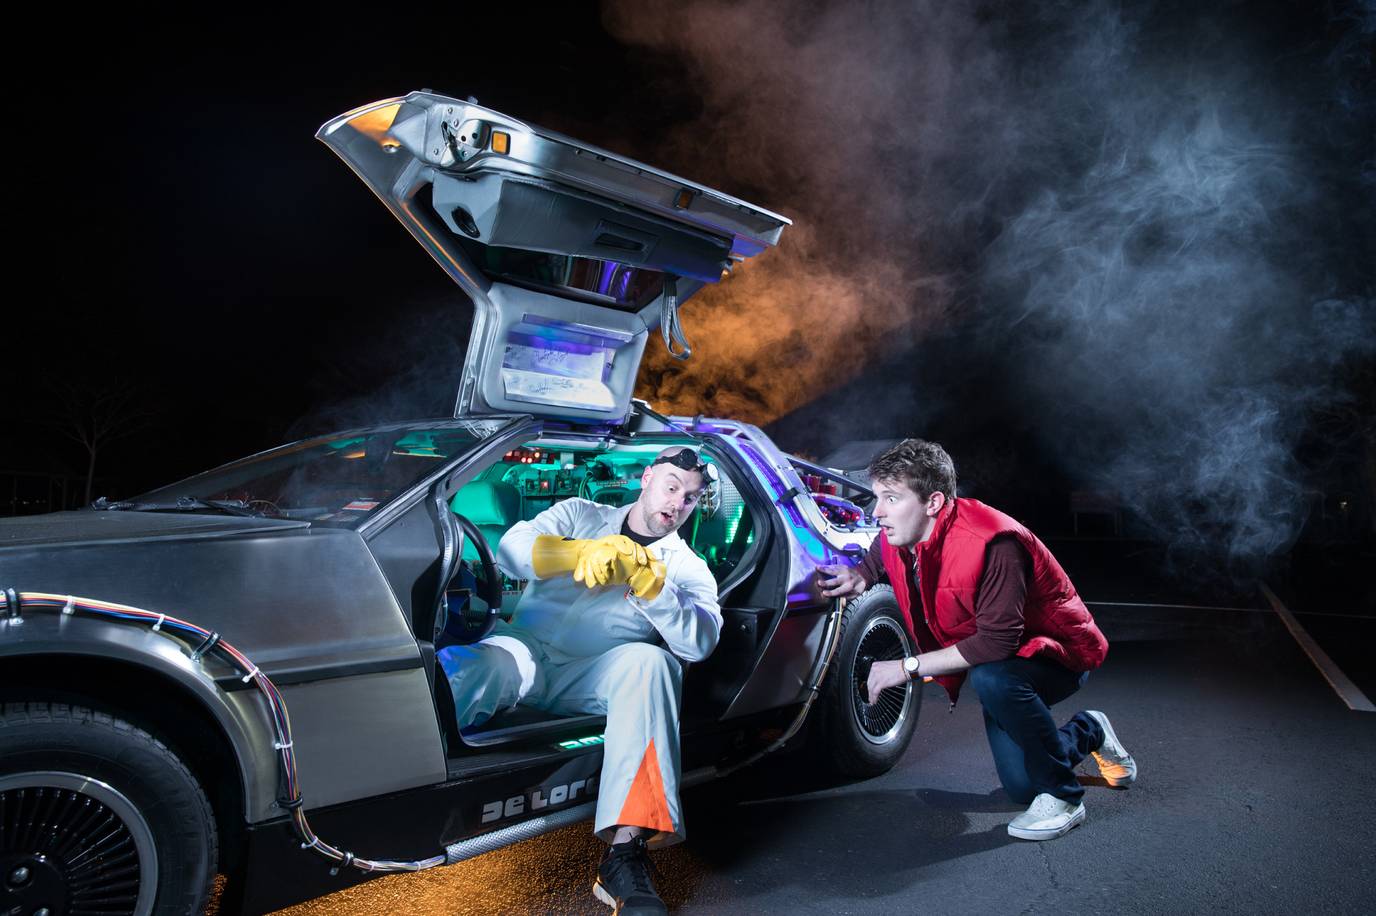 Dr Fuse and a student recreate a scene from Back to the Future.